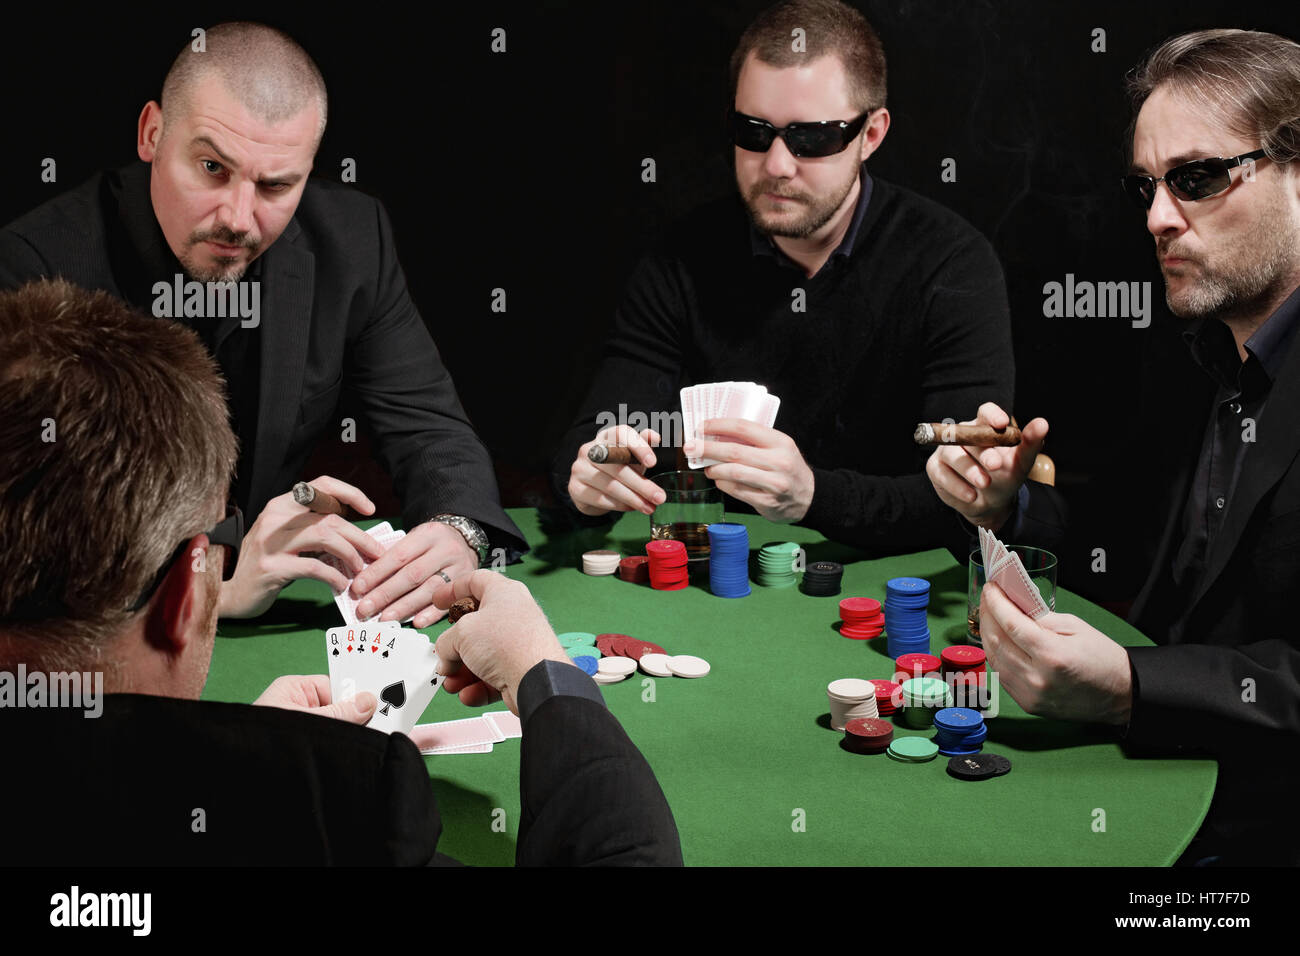 Photo of four men playing poker, smoking cigars and drinking whiskey. Focus is on the winning hand. Stock Photo